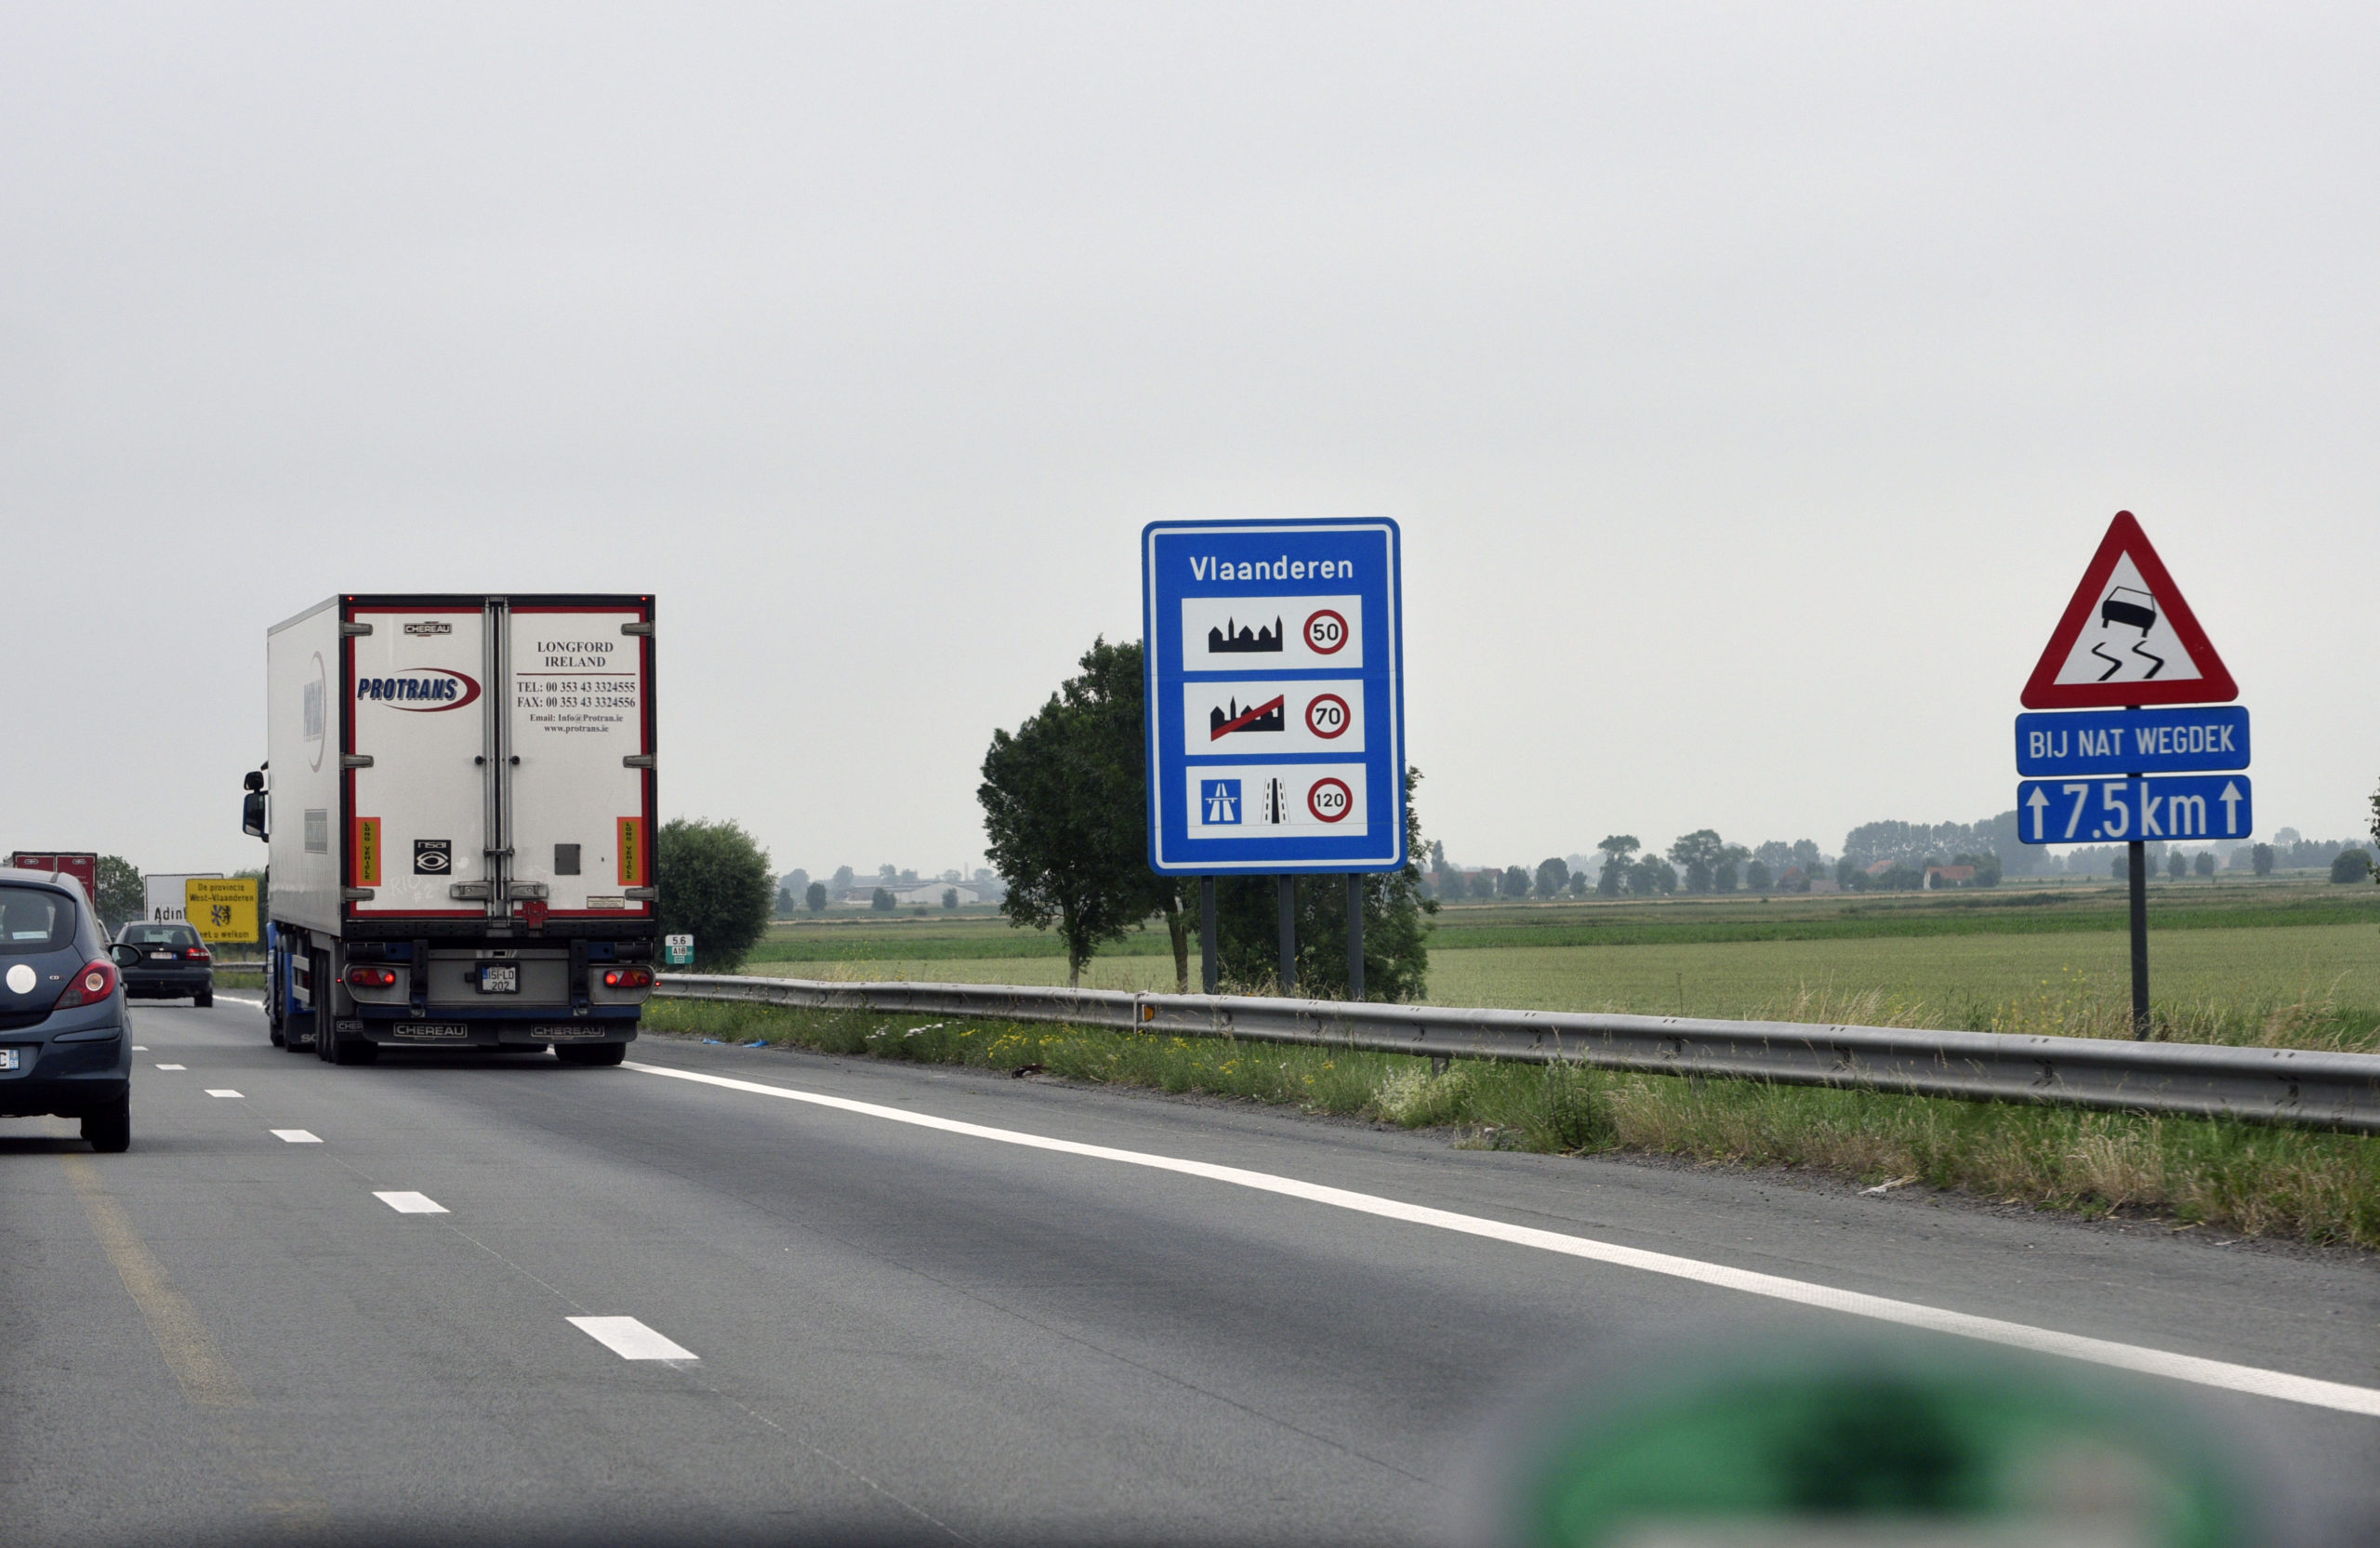 New figures confirm 45% less traffic on Flemish highways